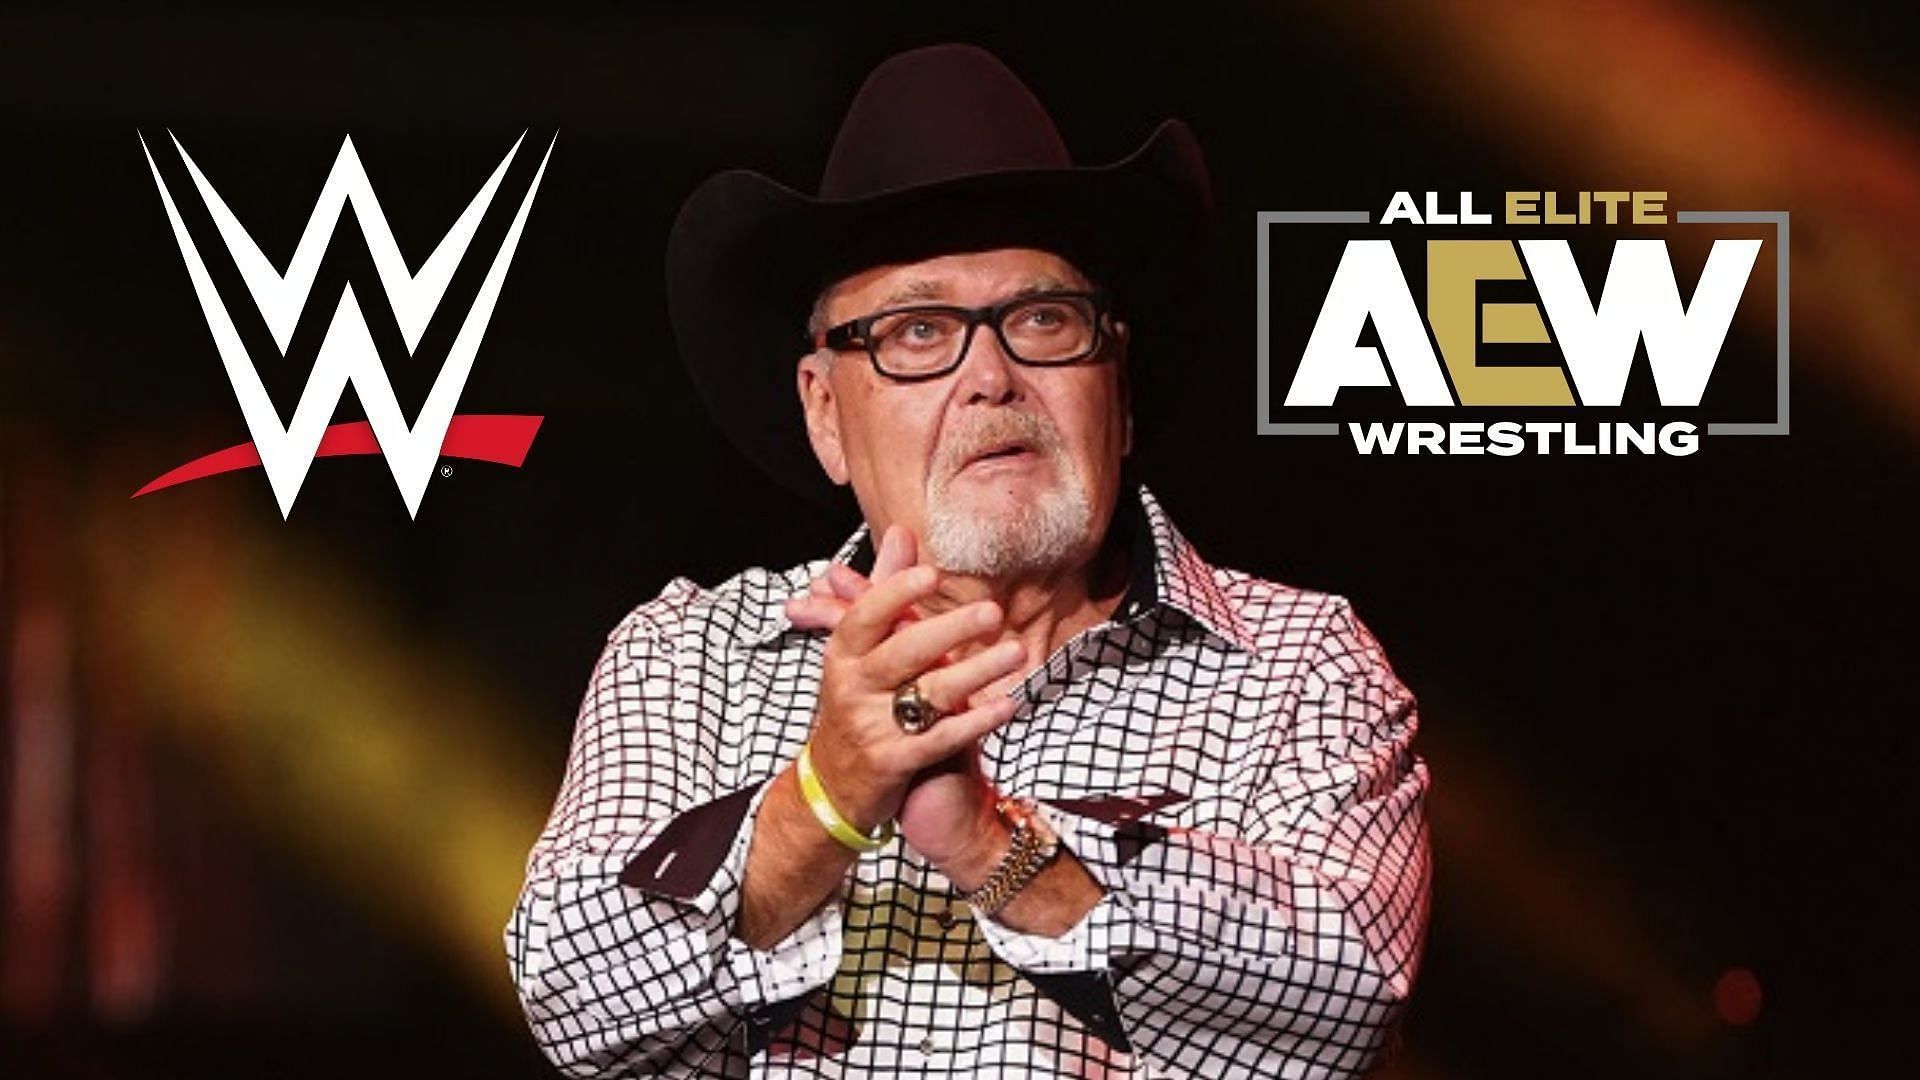 Jim Ross is primarily known as the voice of WWE